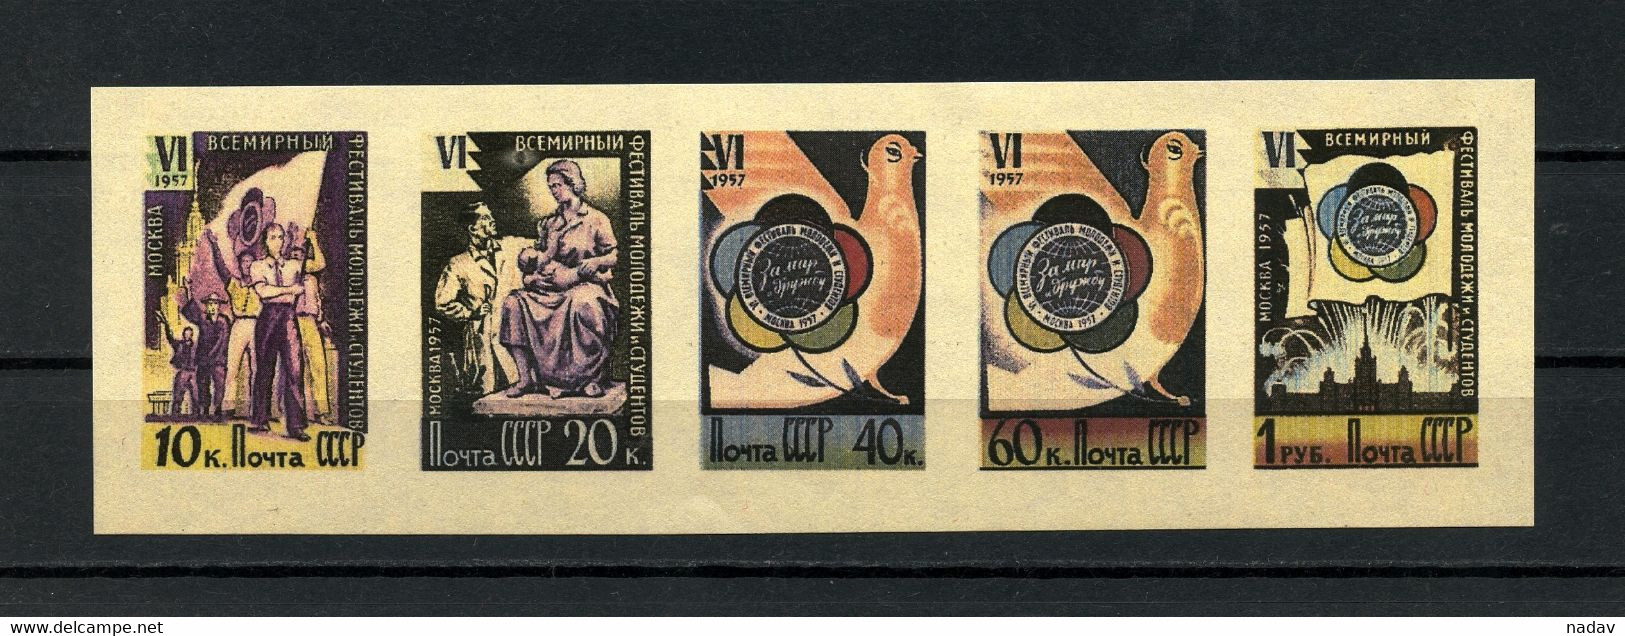 Russia & USSR-1957-  Imperforate, Reproduction - MNH** - Proofs & Reprints